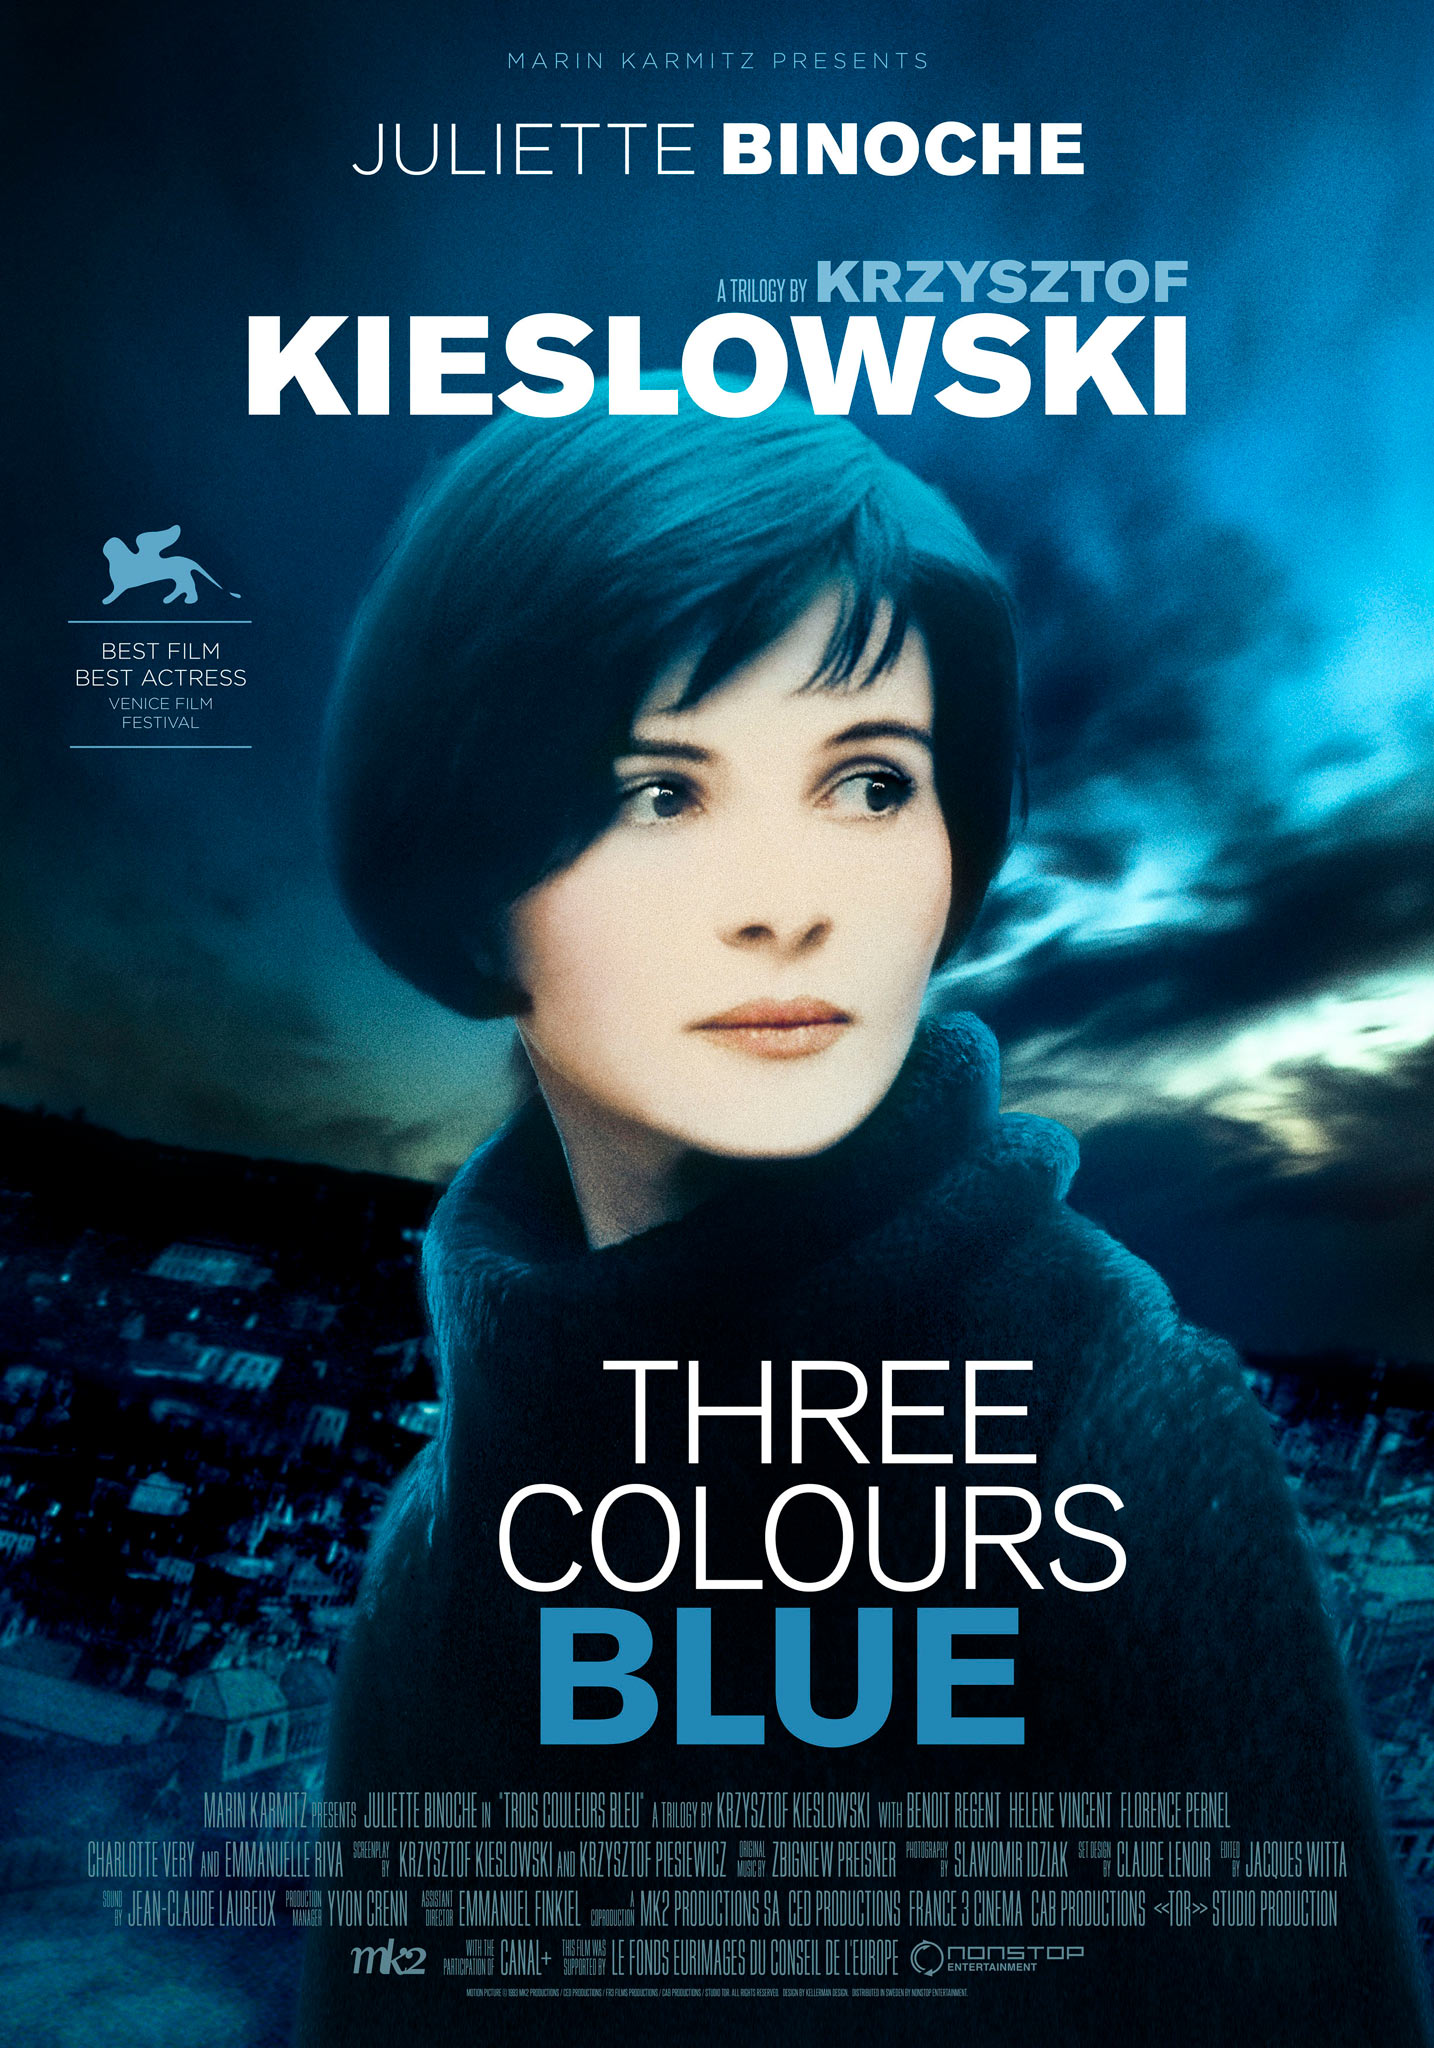 Three Colours Blue (1993) theatrical onesheet